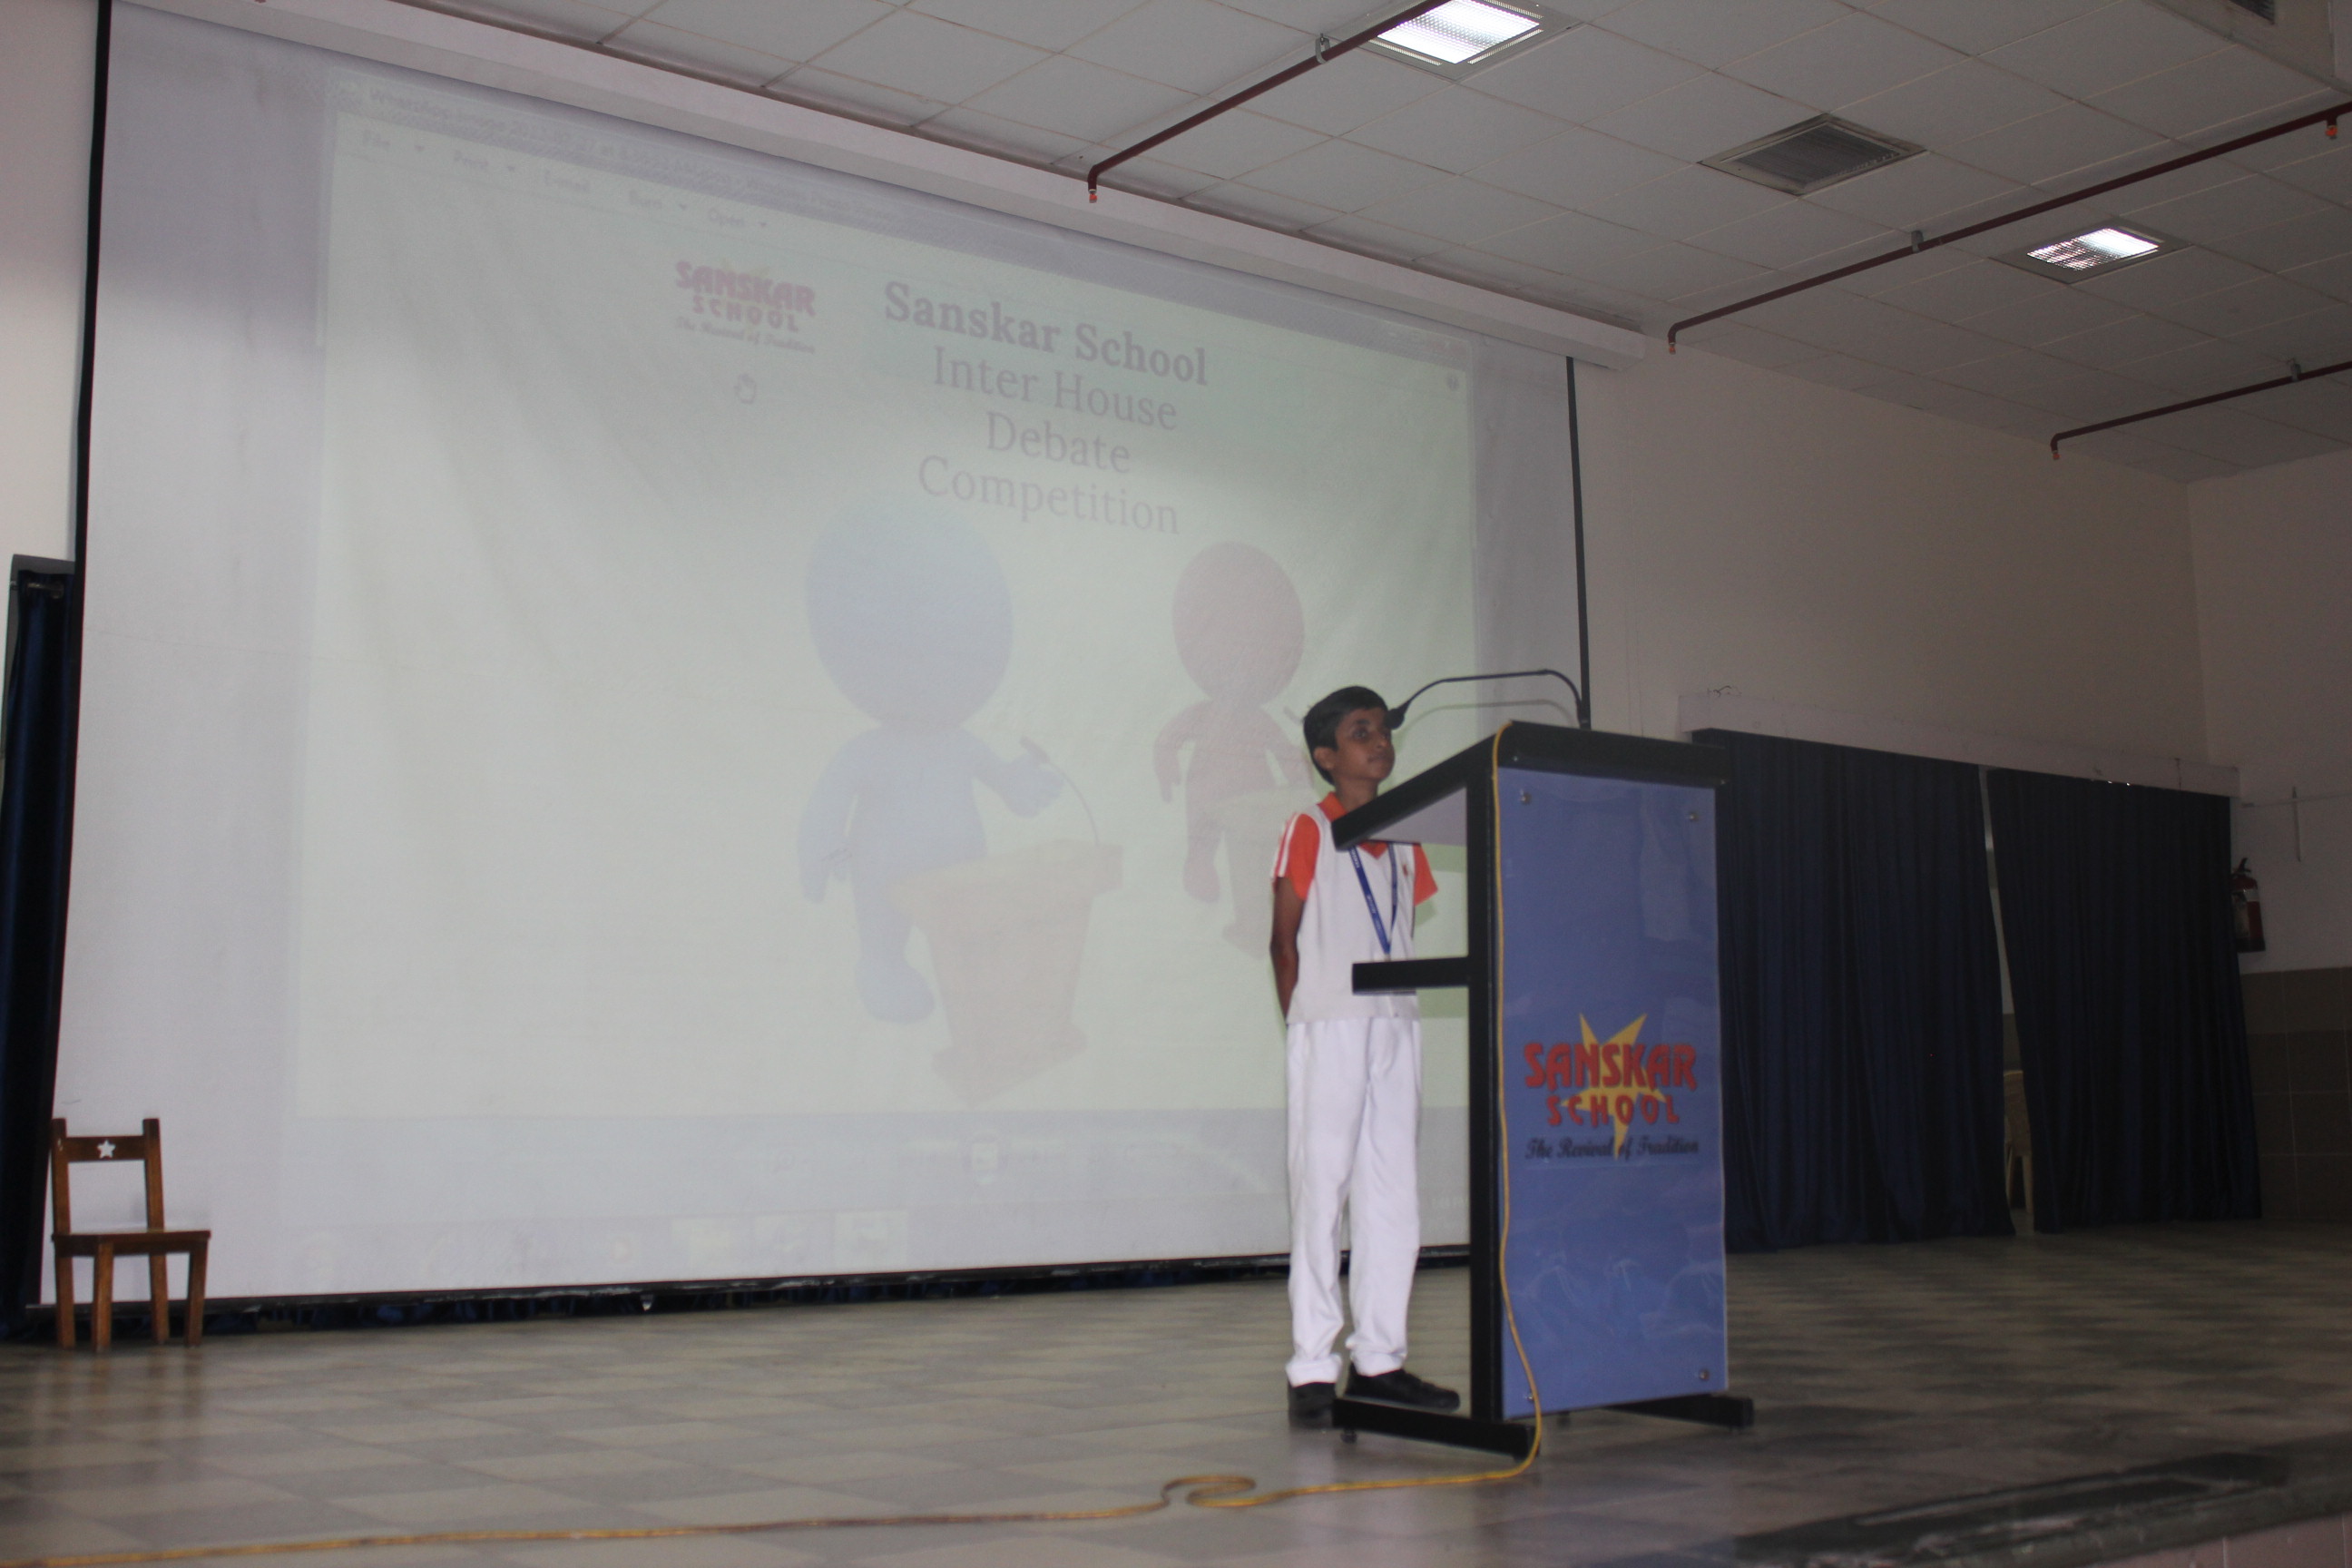 Inter - House Debate Competition 2022